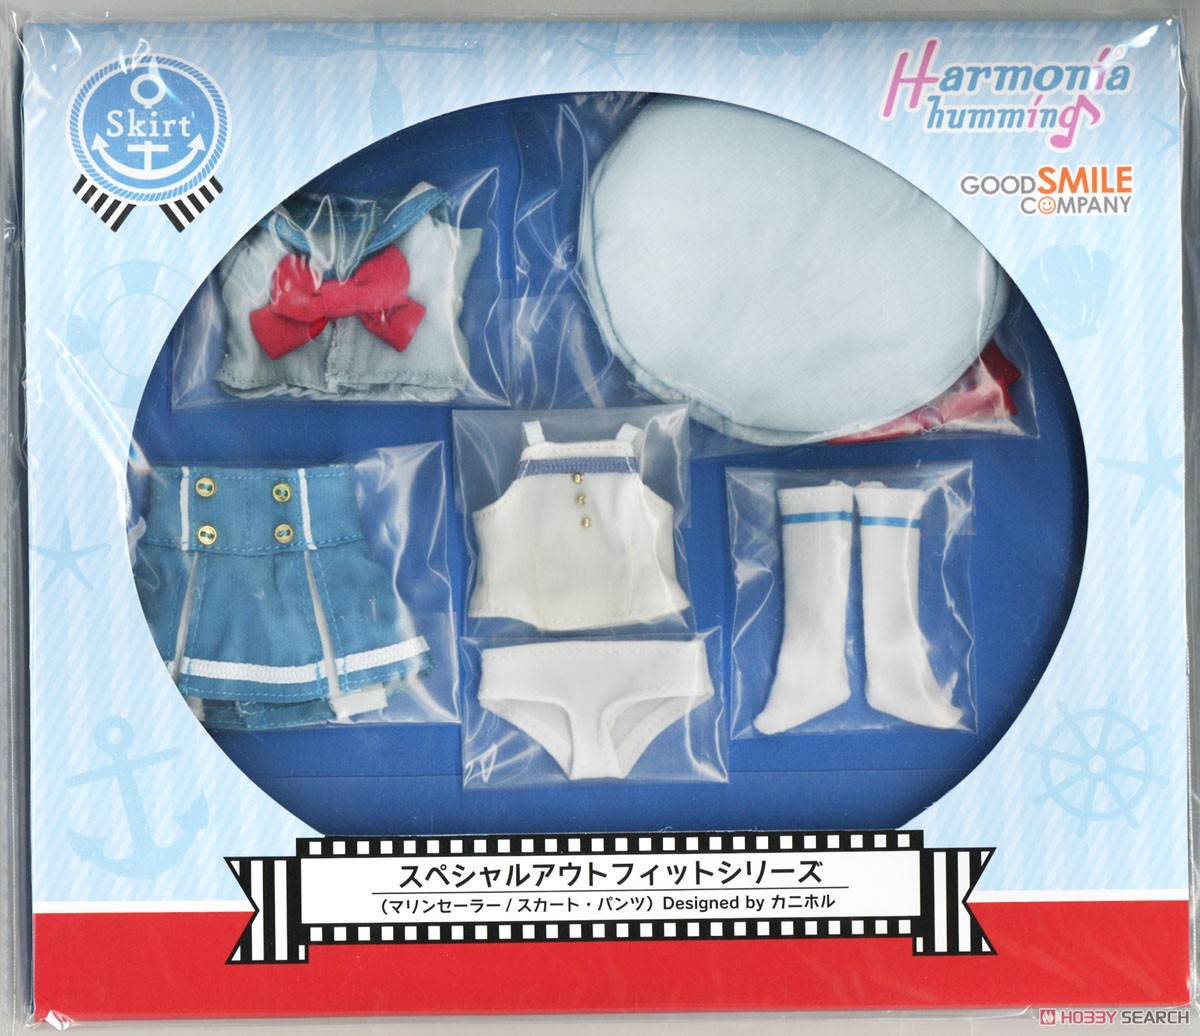 Harmonia Humming Special Outfit Series (Marine Sailor/Skirt) Designed by Kanihoru (Fashion Doll) Package1